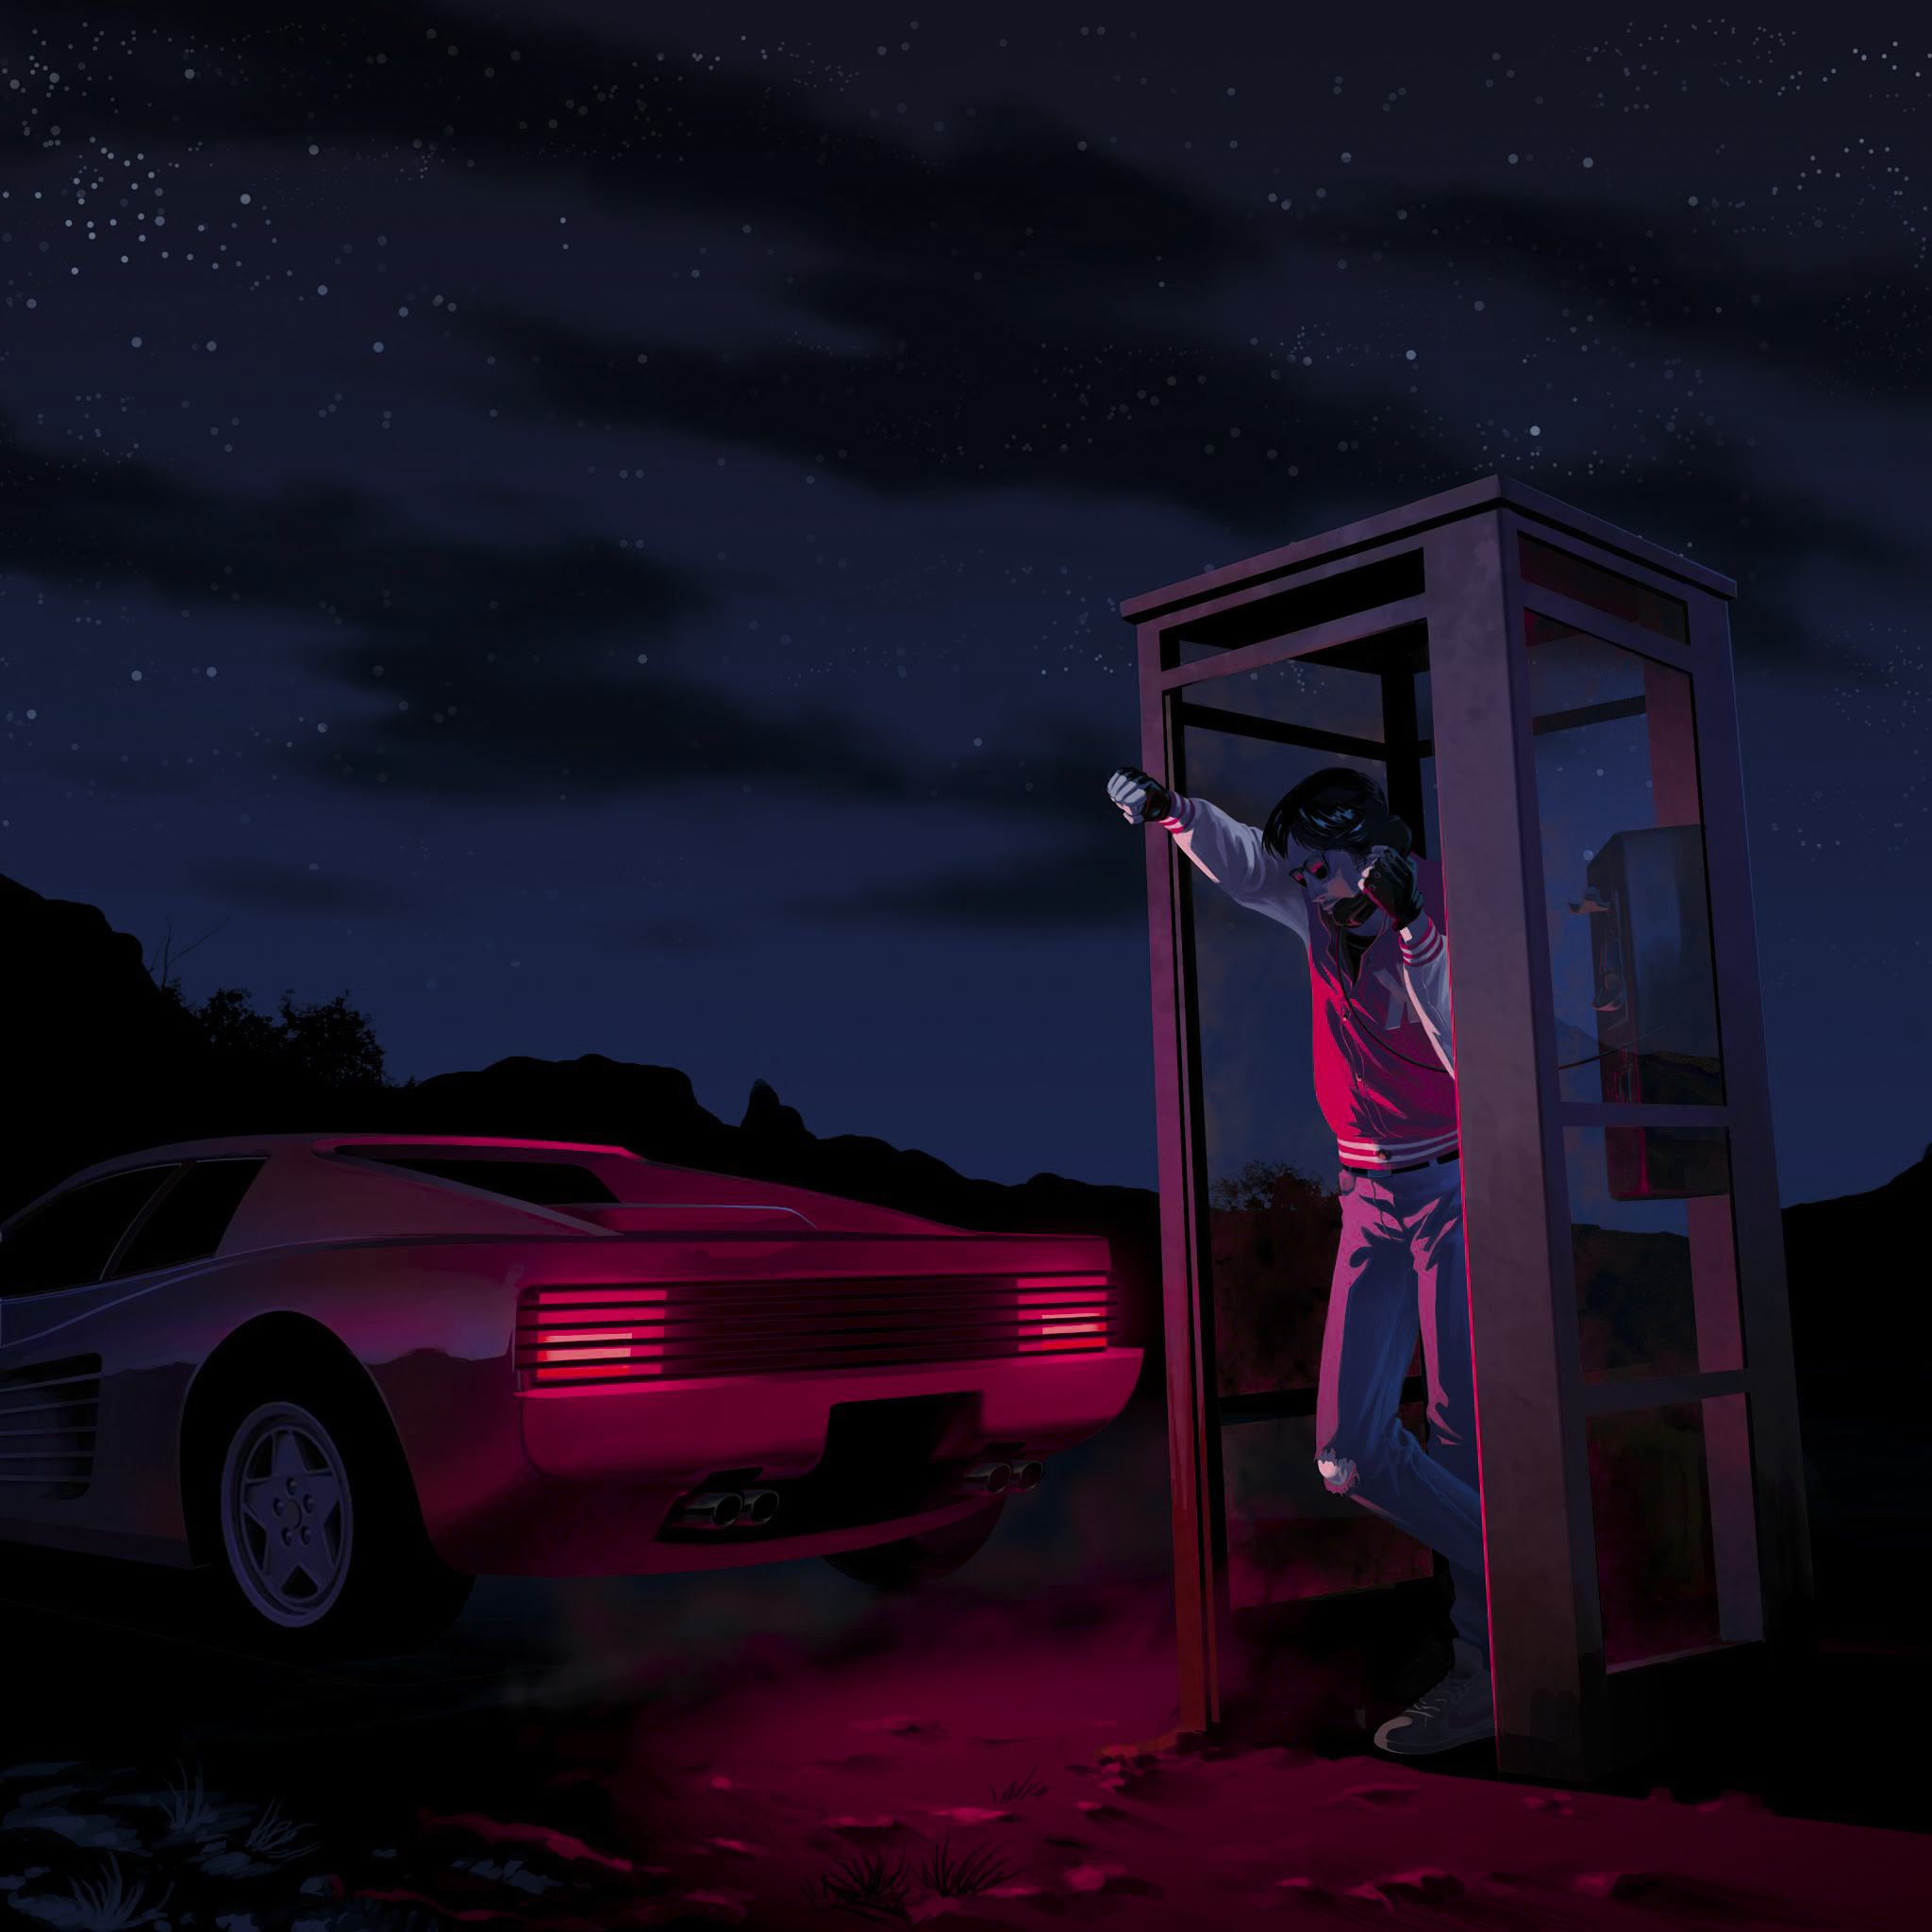 Viral pictures of the day: Mine is Kavinsky - Nightcall